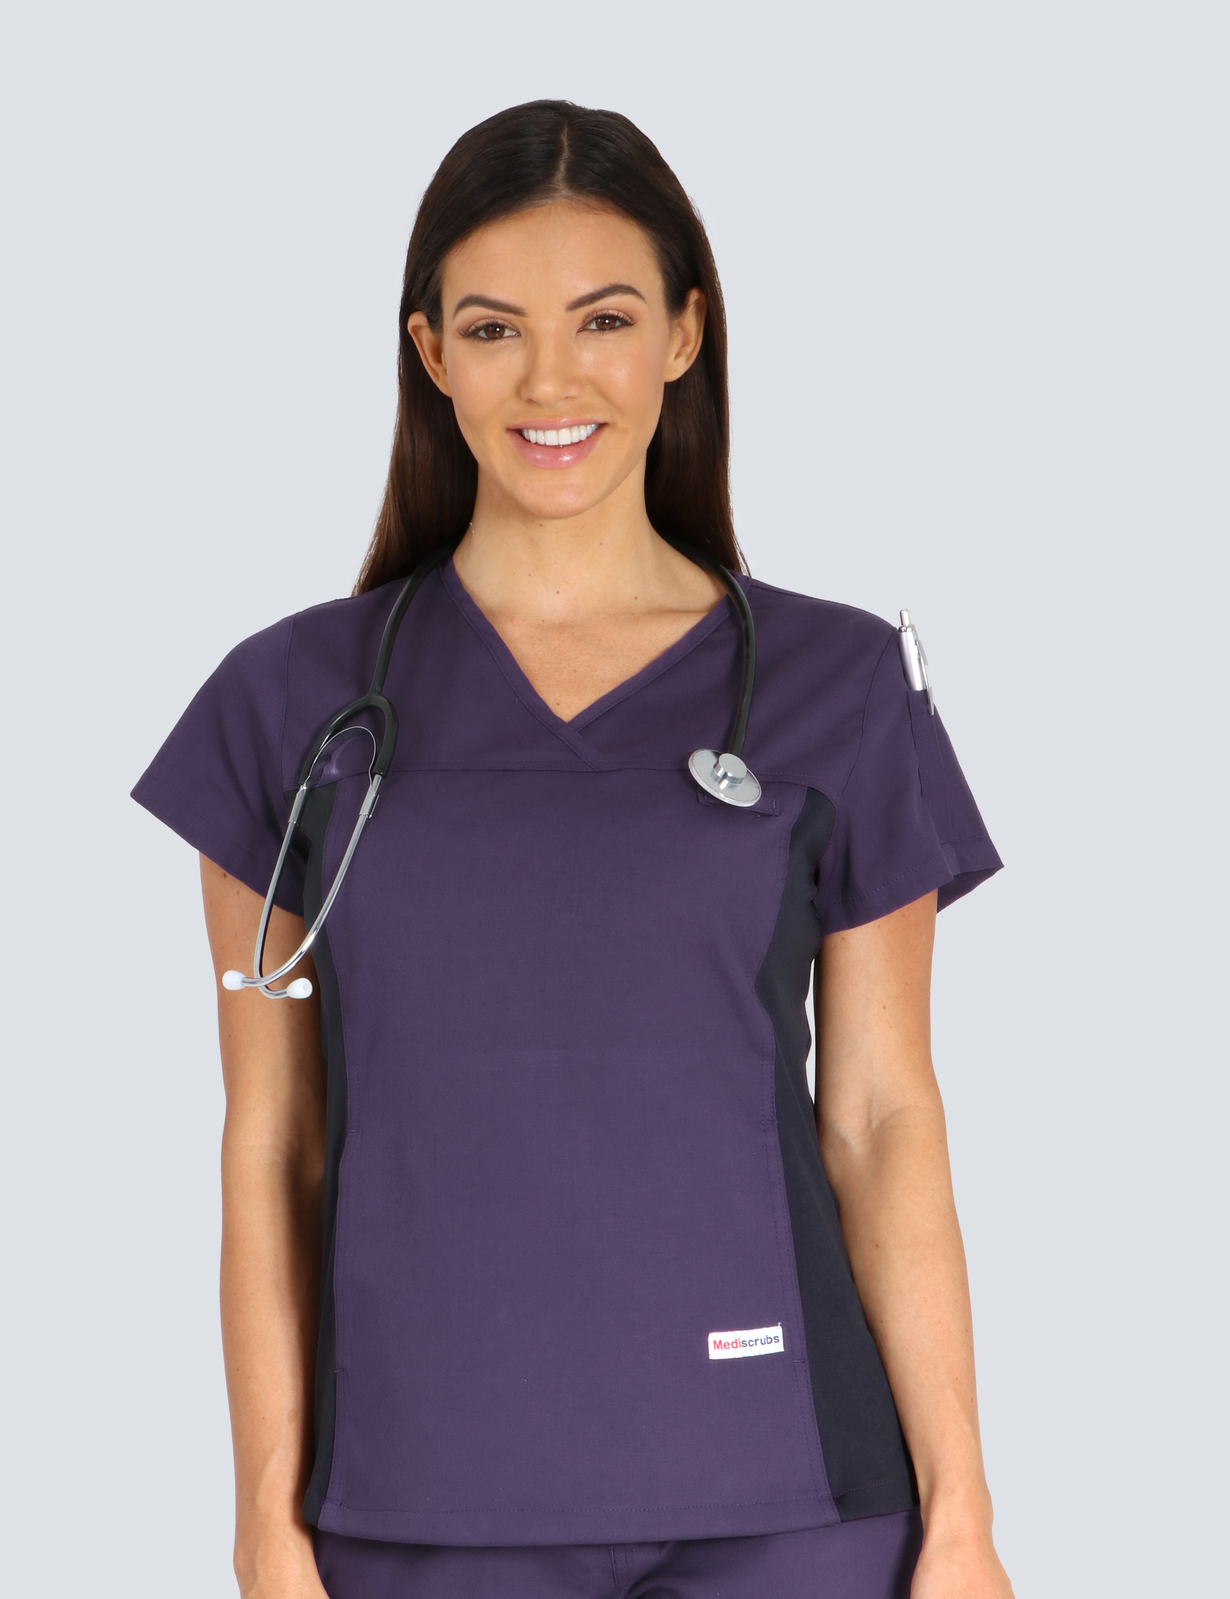 Women's Fit Spandex - Townsville Hospital - Pharmacy (top only)